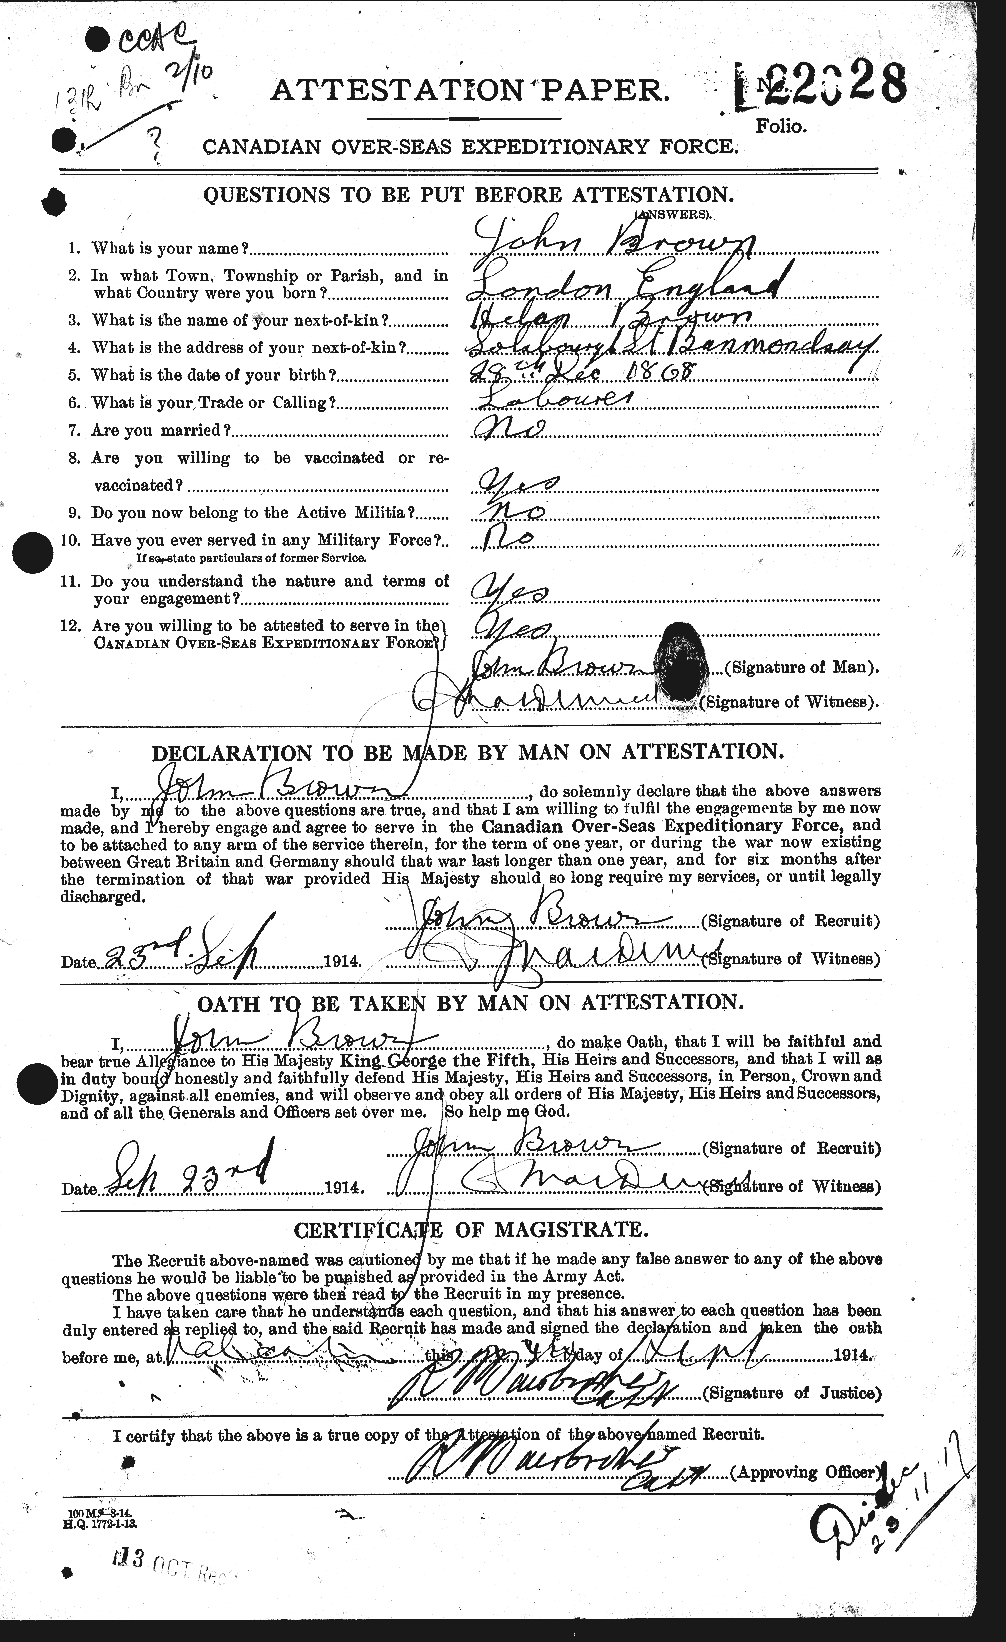 Personnel Records of the First World War - CEF 264547a